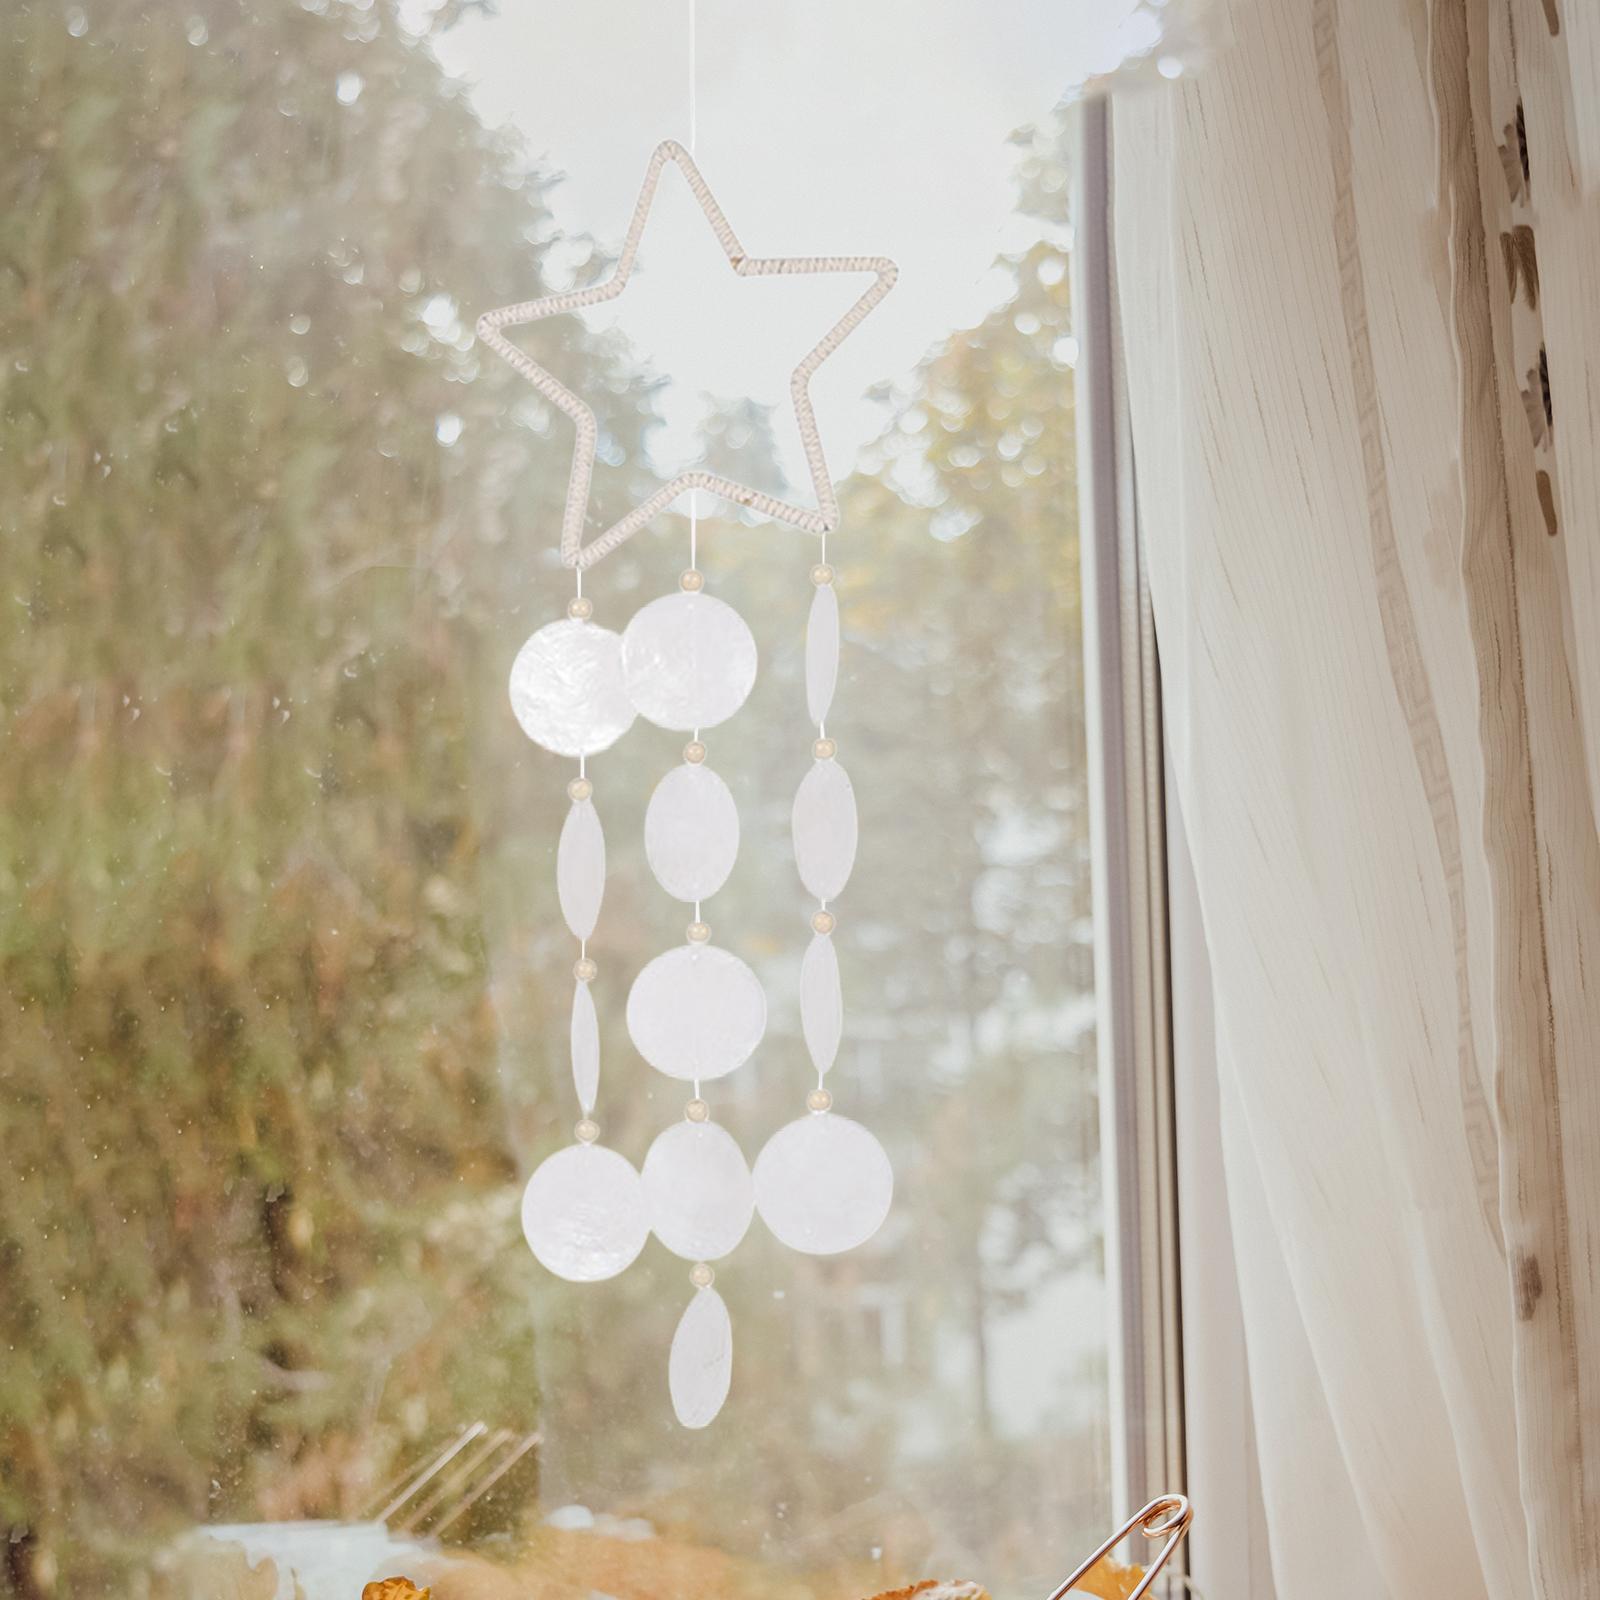 Shell Wind Chimes Memorial Decorative Mobiles Sympathy for Indoor Home Star